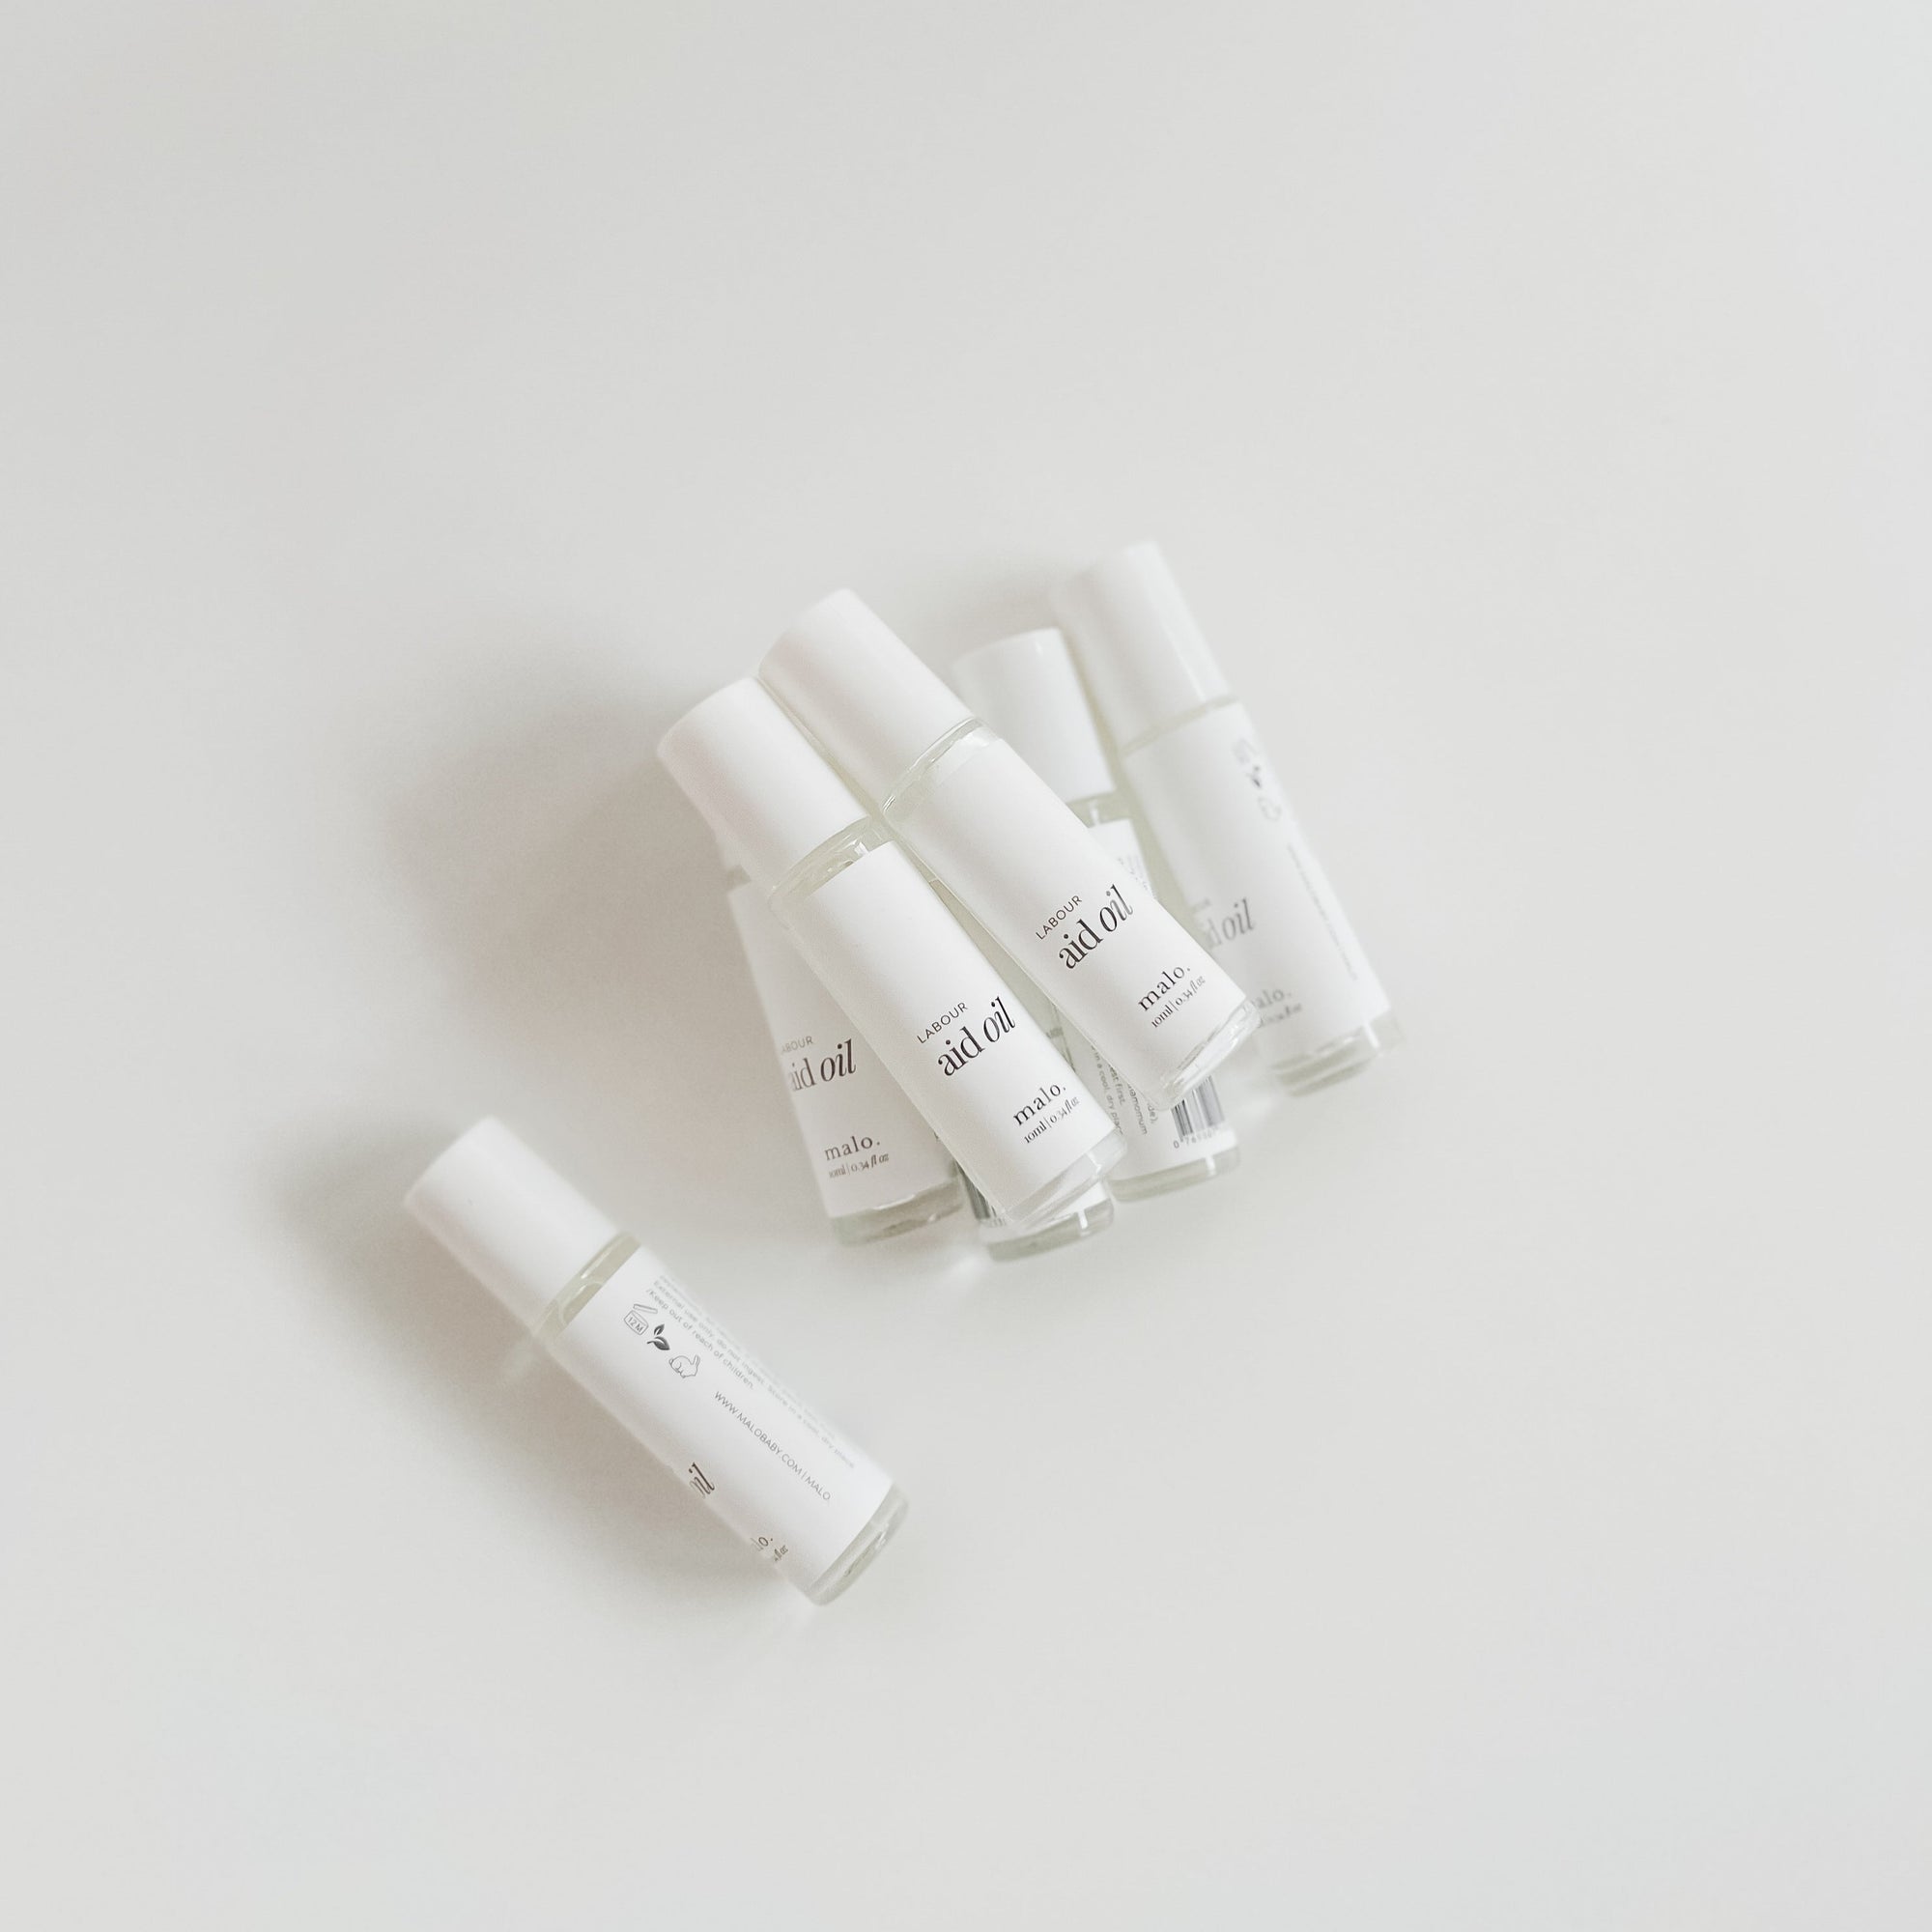 Five white nail polish bottles arranged on a plain background with Malo The Label's Cinnamon Bark Essential Oil.